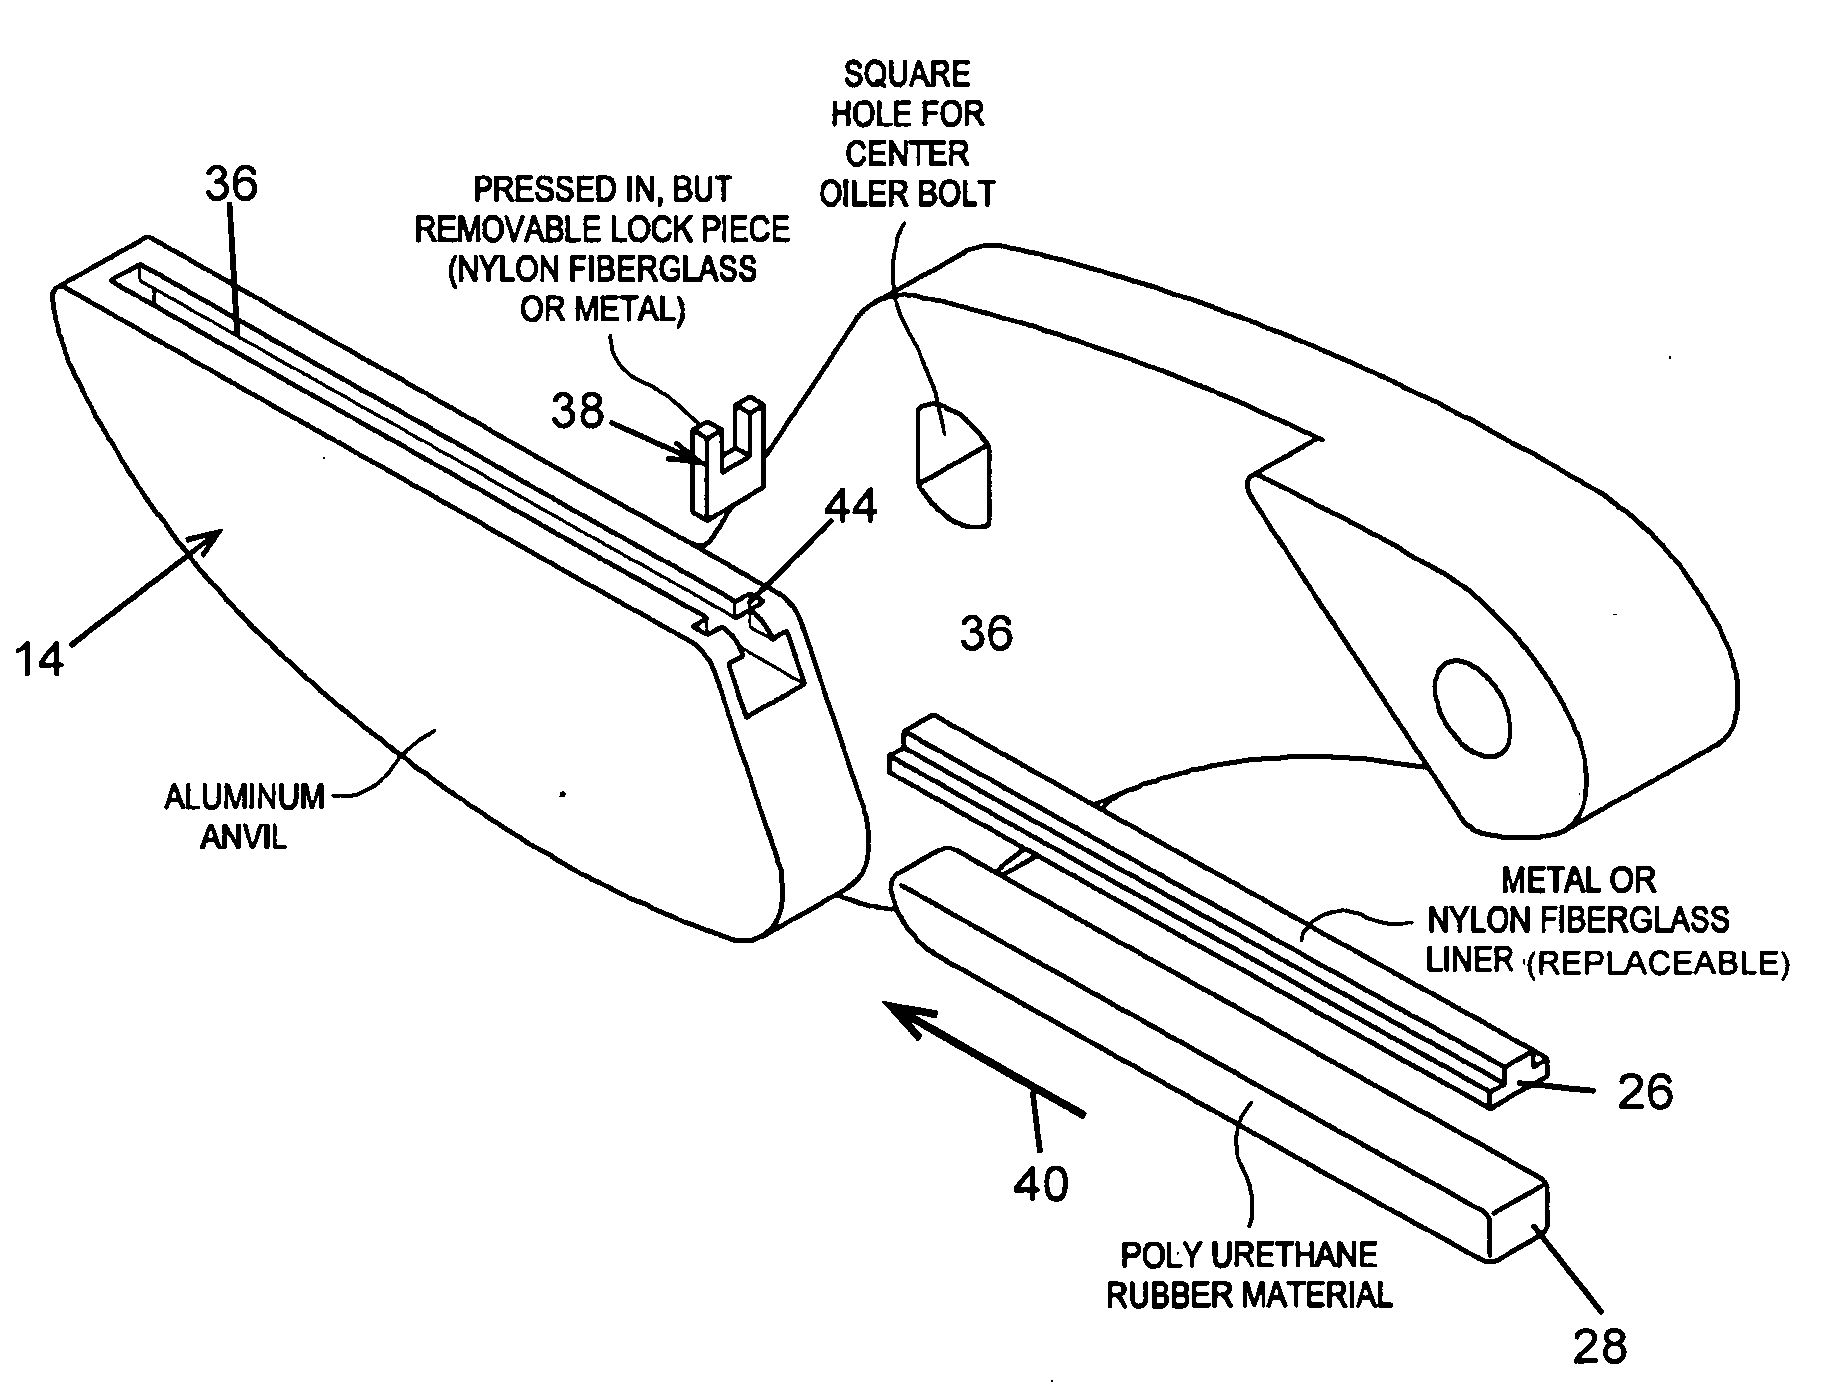 Method and apparatus for anvil pruner and lopper with shock absorbing feature